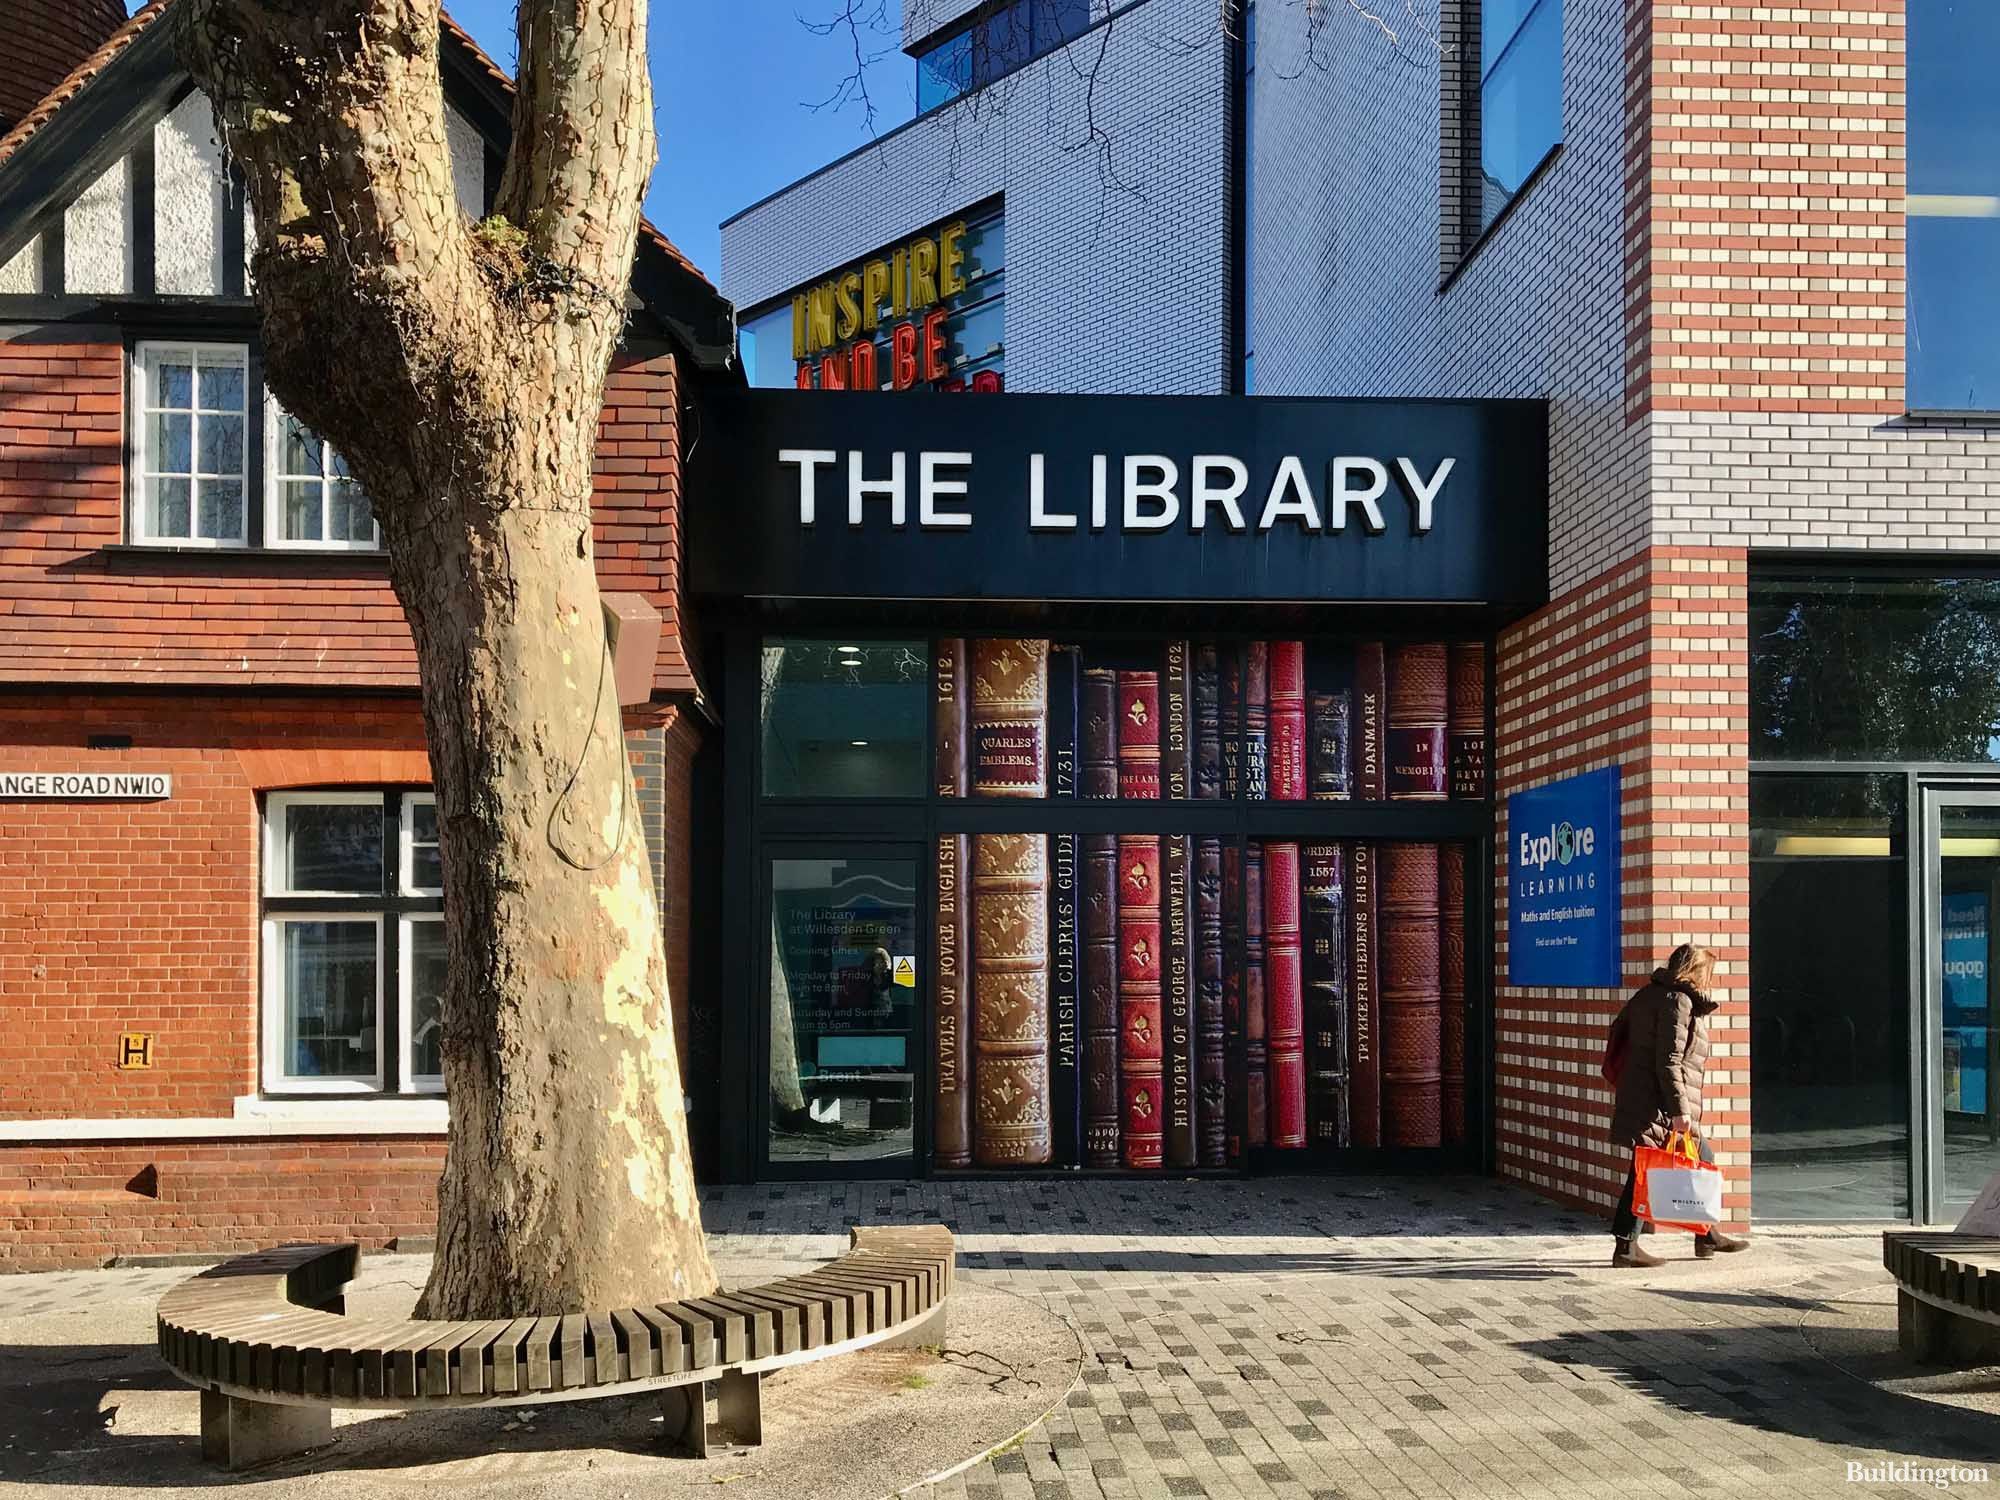 Entrance to The Library at Willesden Green on Grange Road in London NW10.